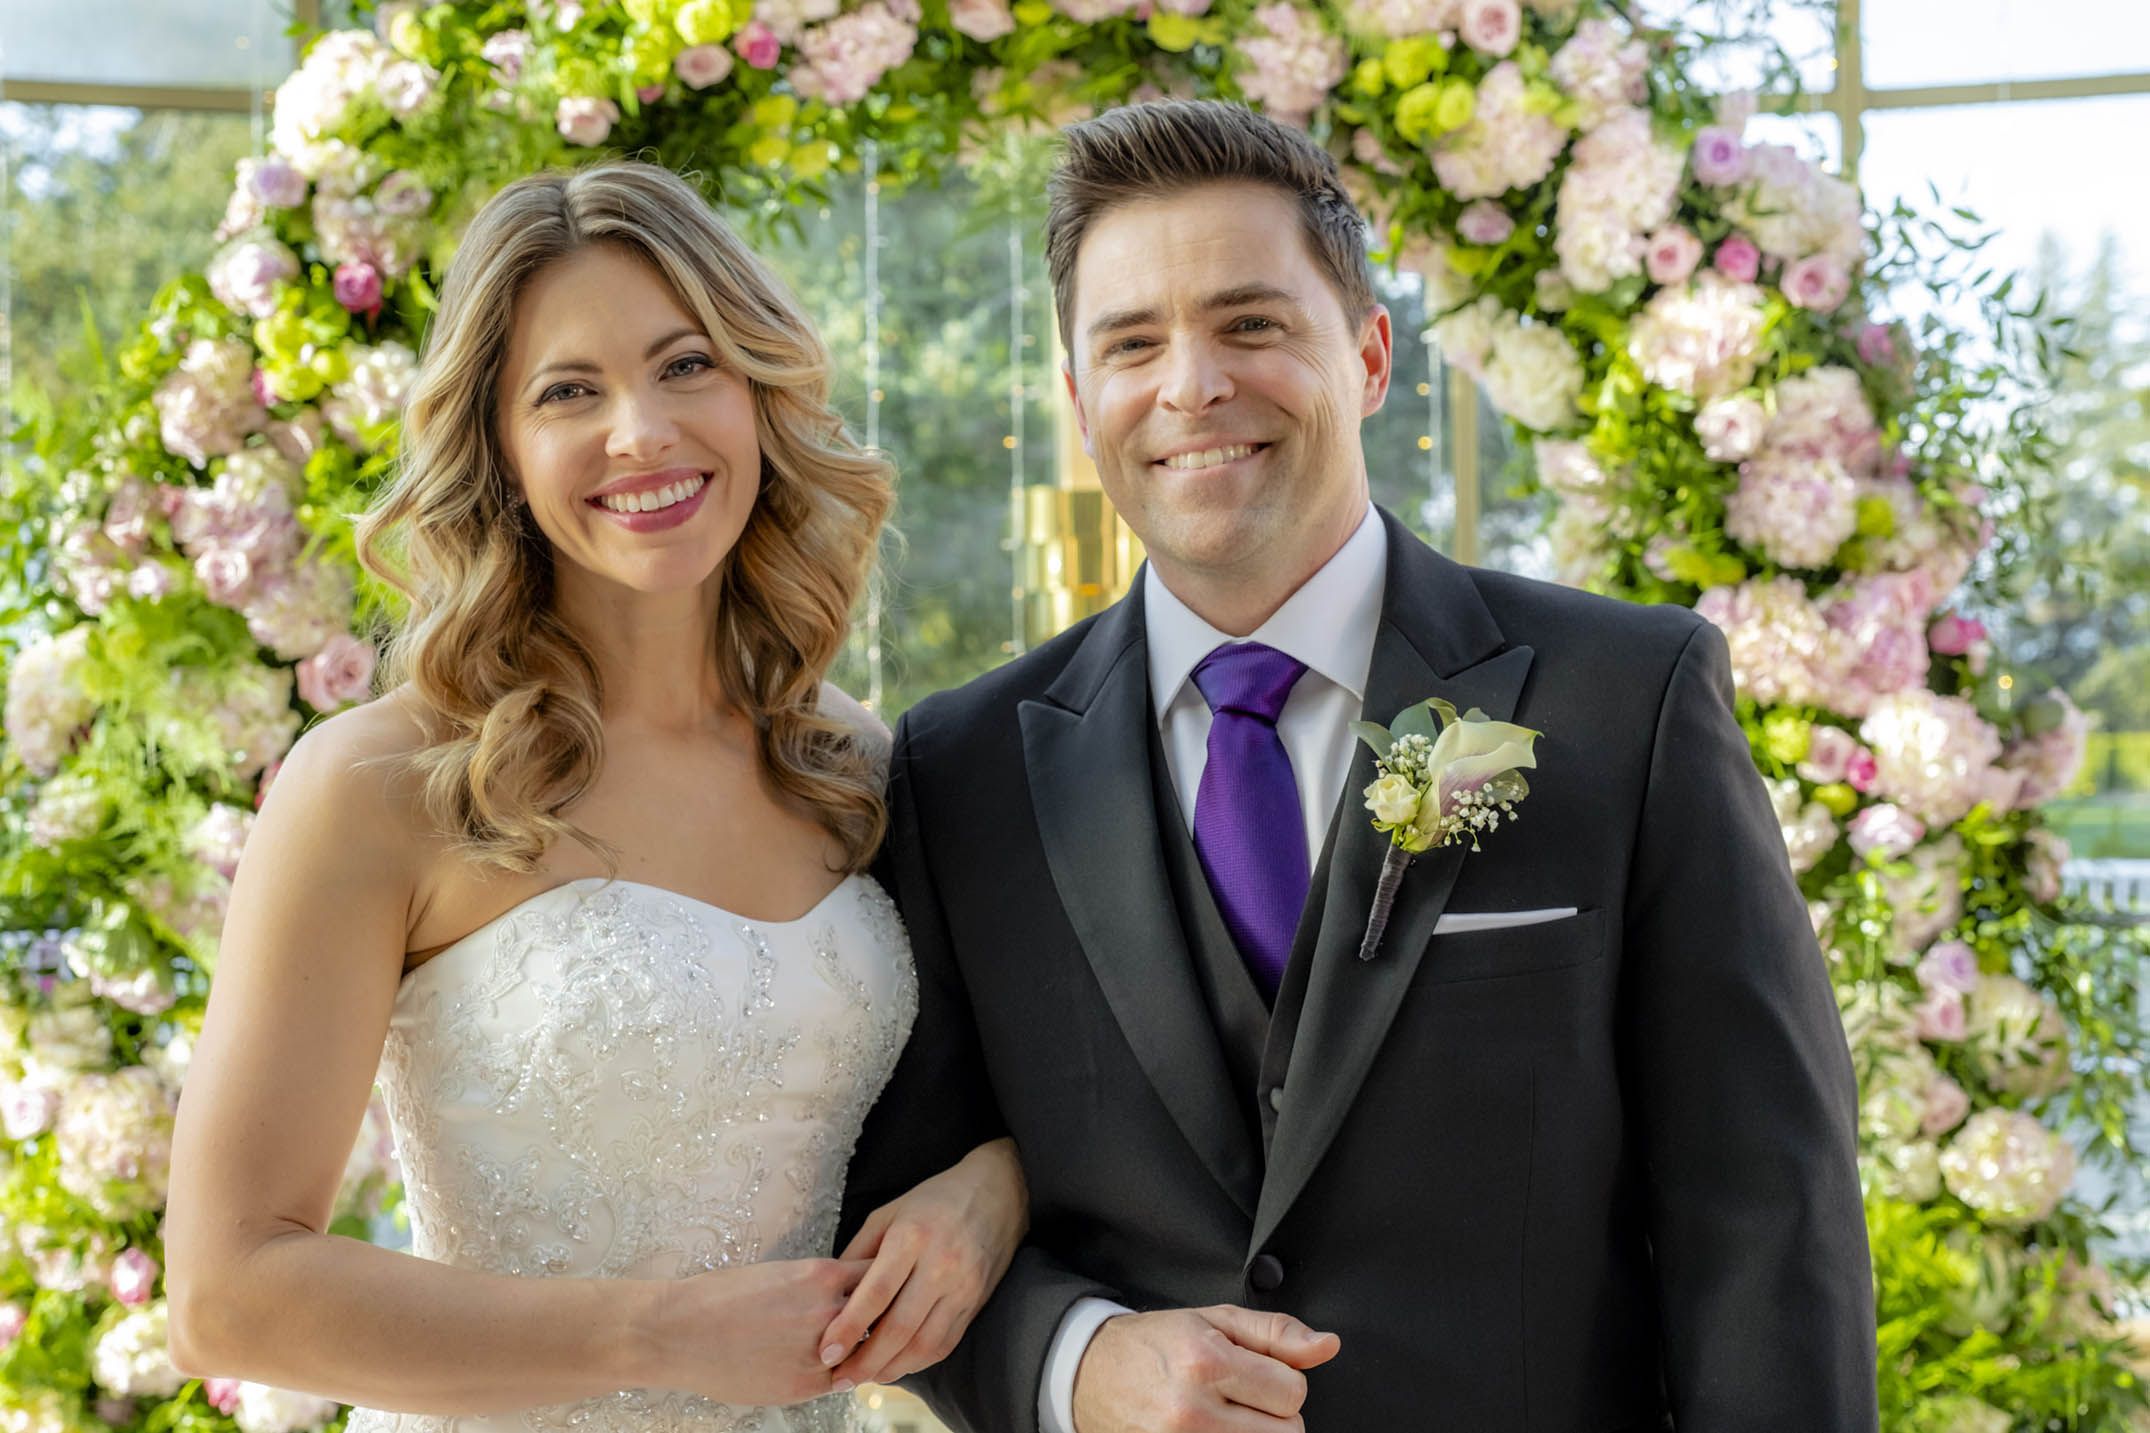 Who Are Hallmark Movie Stars Pascale Hutton And Kavan Smith? - 5 Facts About "The Perfect Bride" Stars Pascale Hutton And Kavan Smith